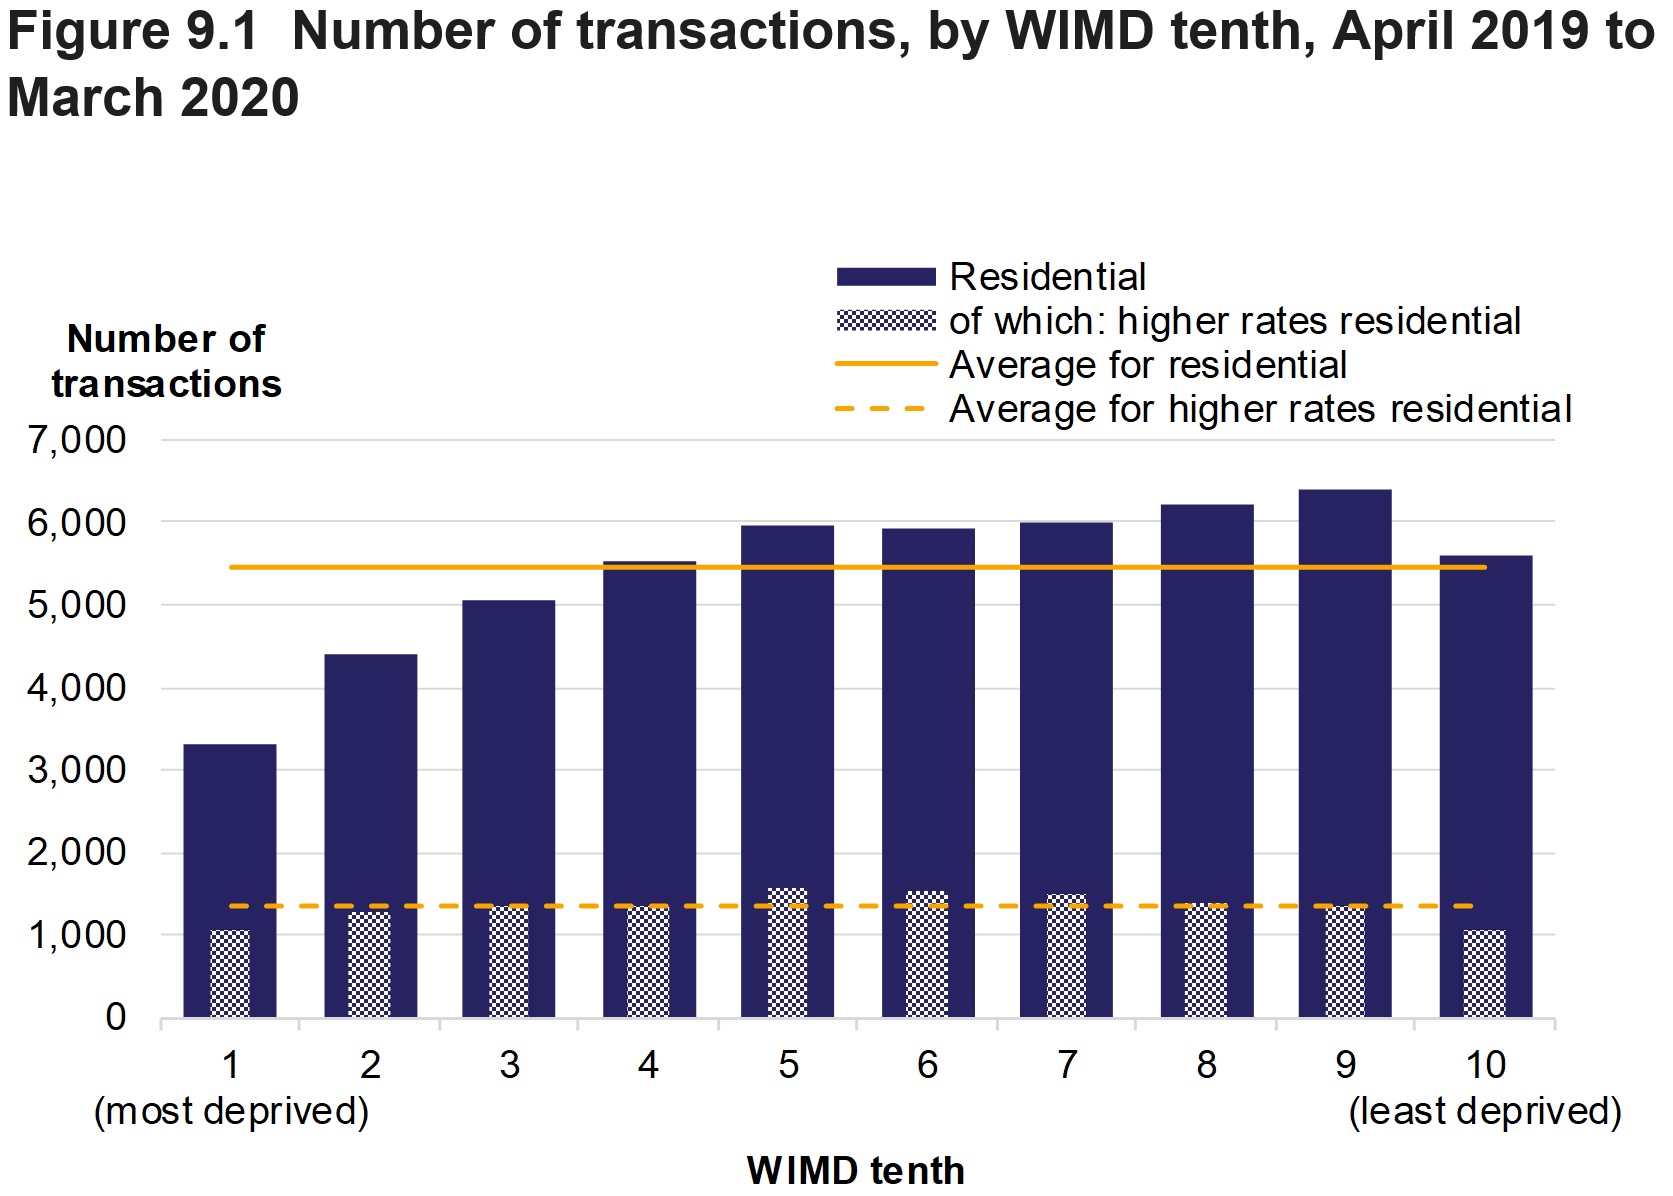 Figure 9.1 shows the number of residential transactions and at the higher rates, by WIMD tenths, for April 2019 to March 2020. Average values over all WIMD tenths are also presented.